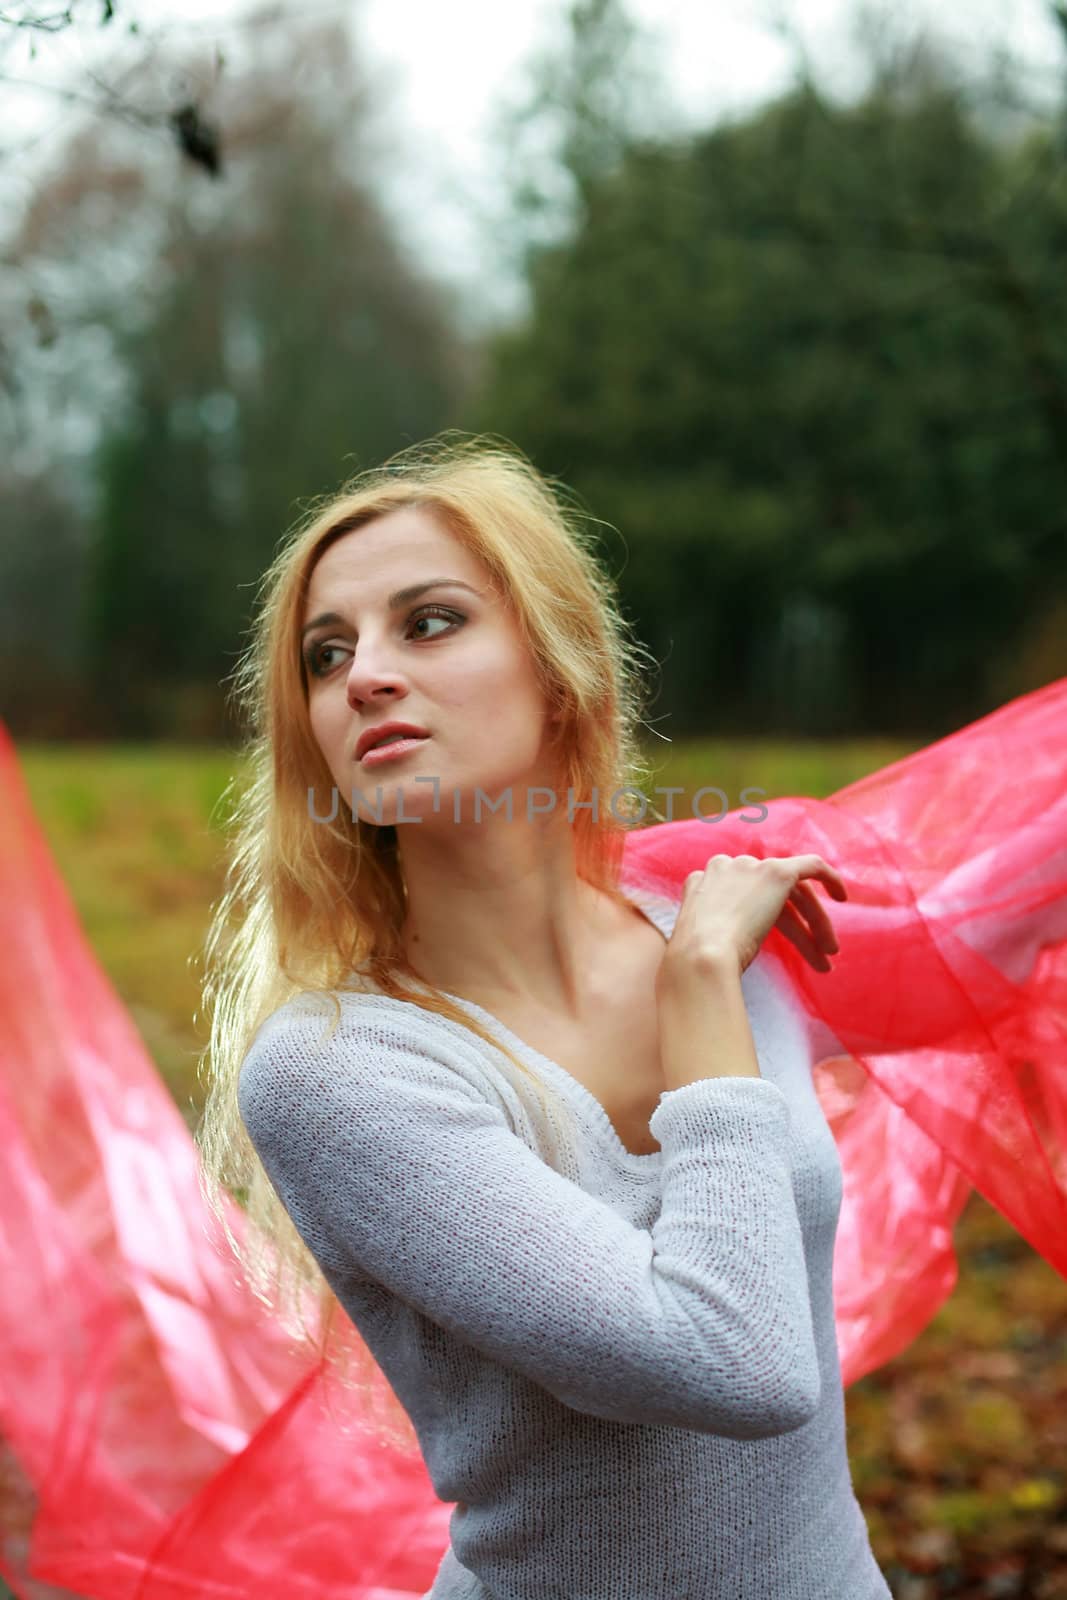 An image of a young woman with a red shawl